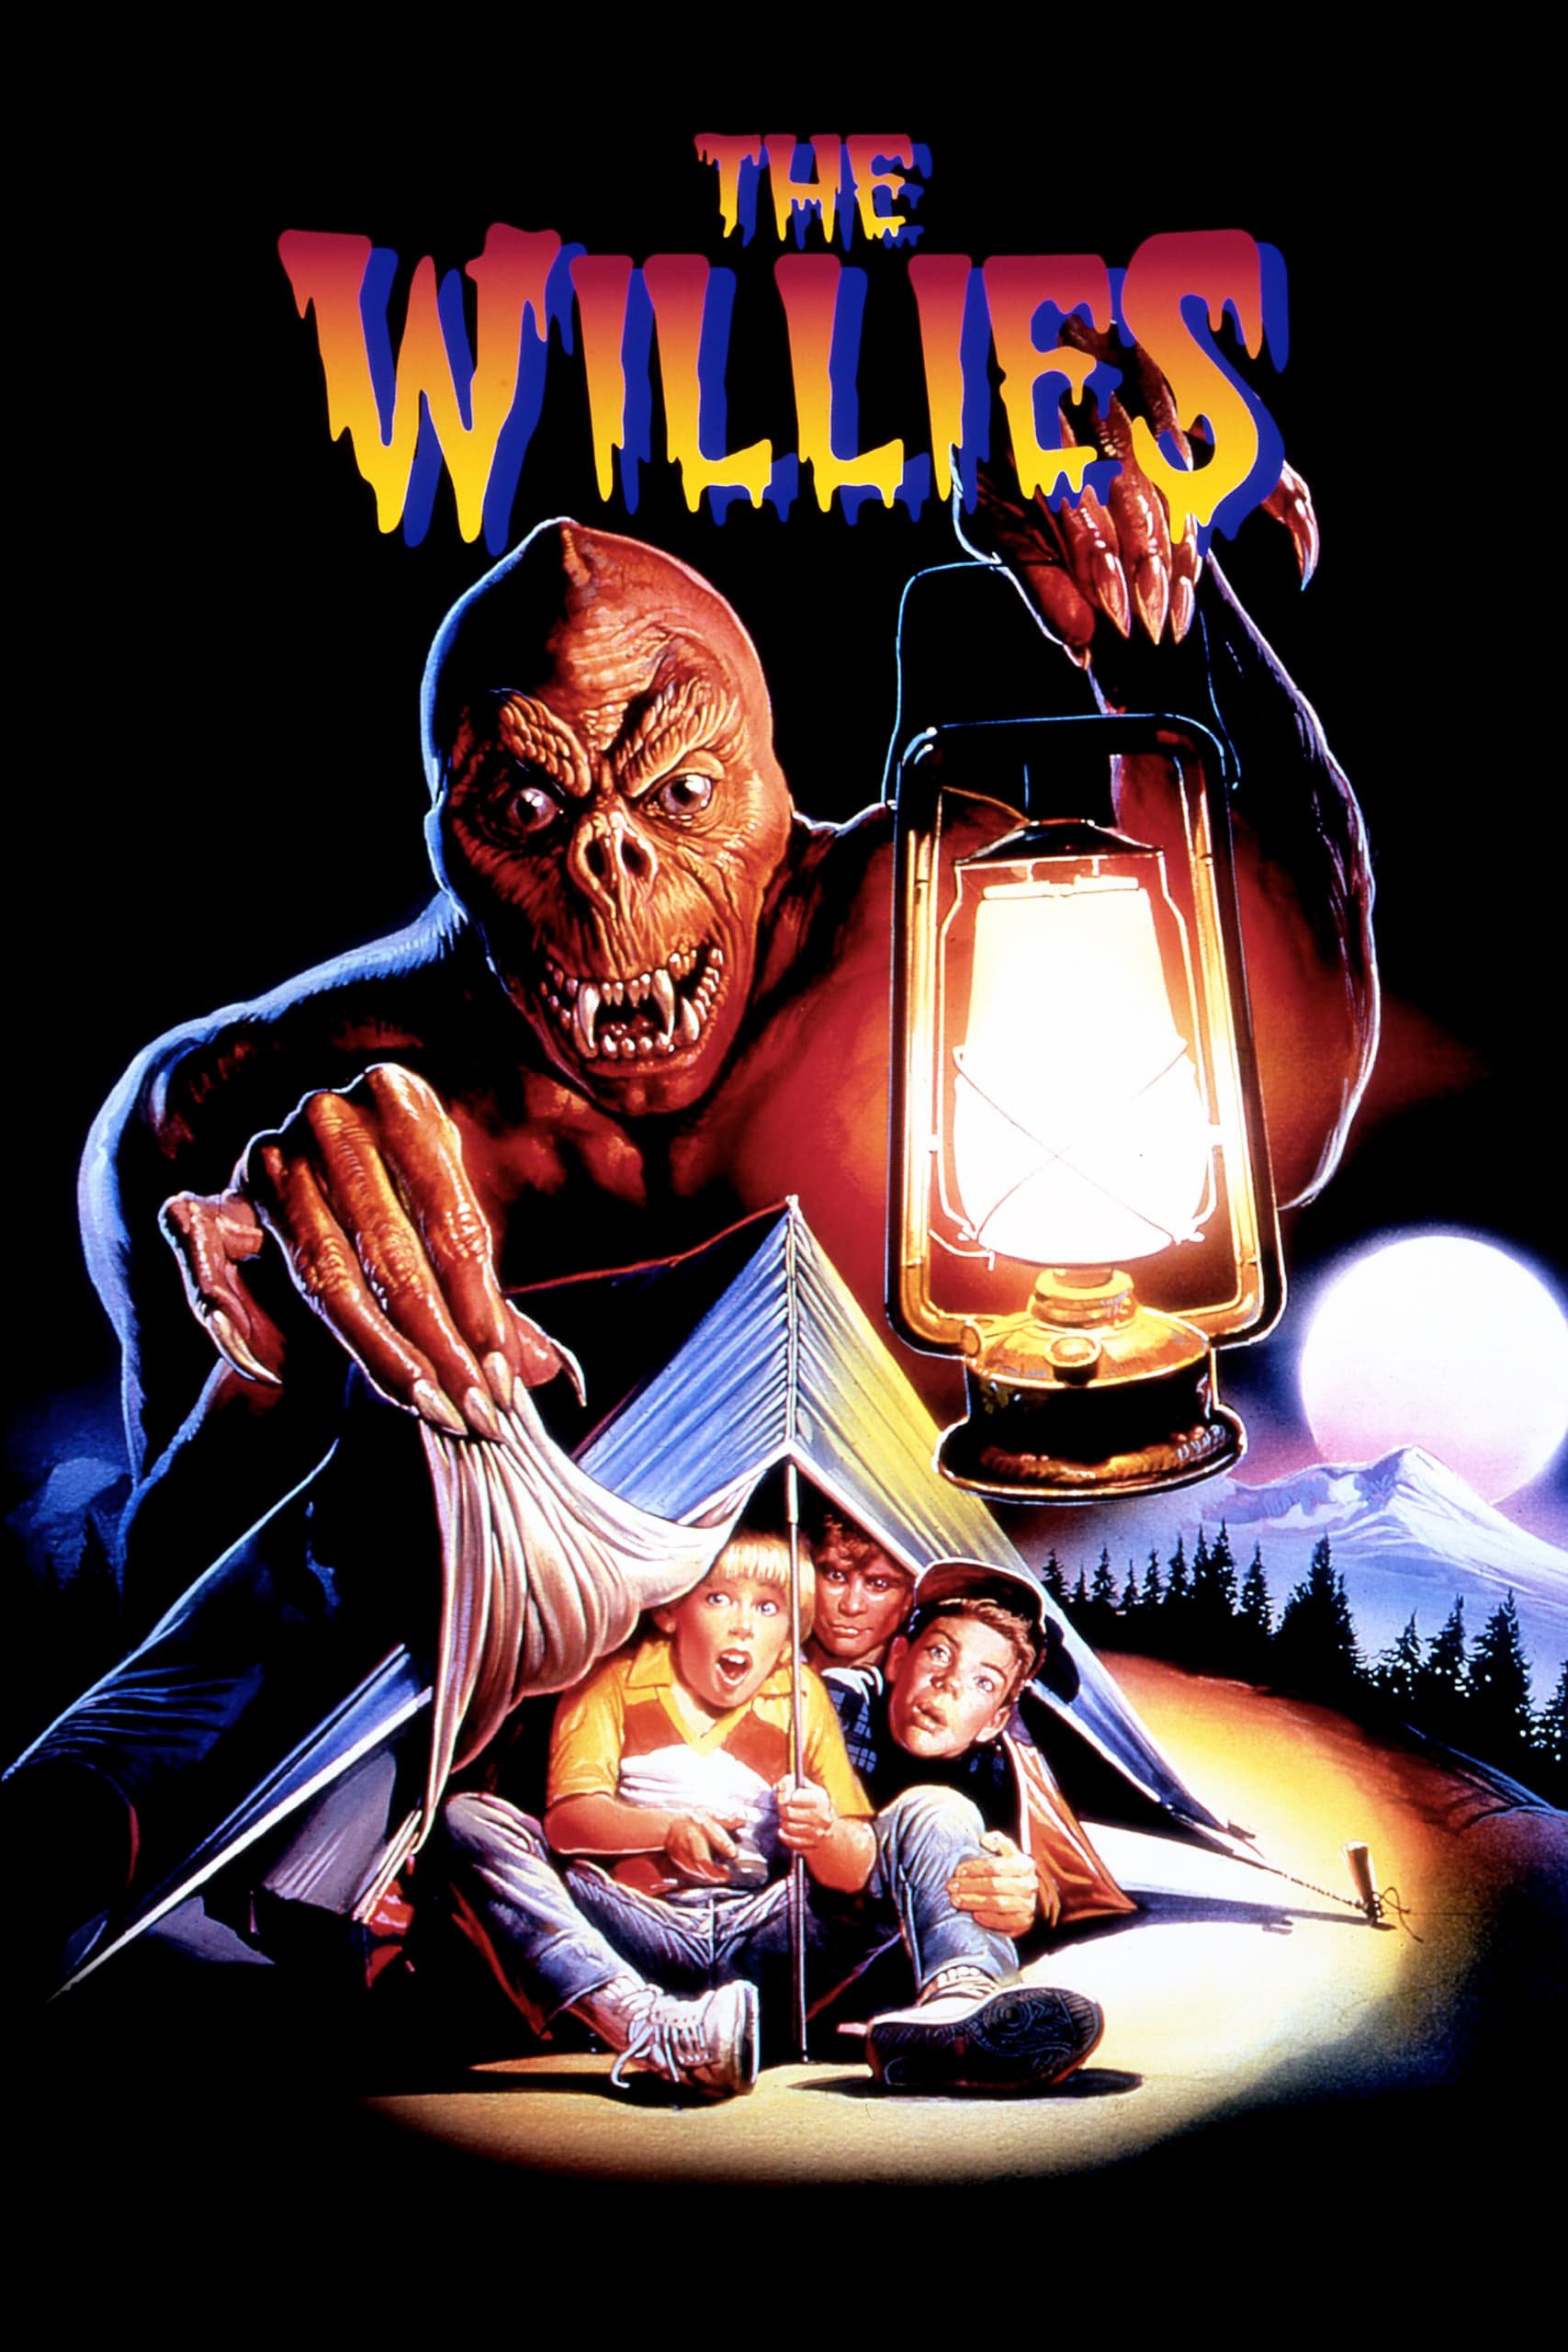 The Willies (1990)